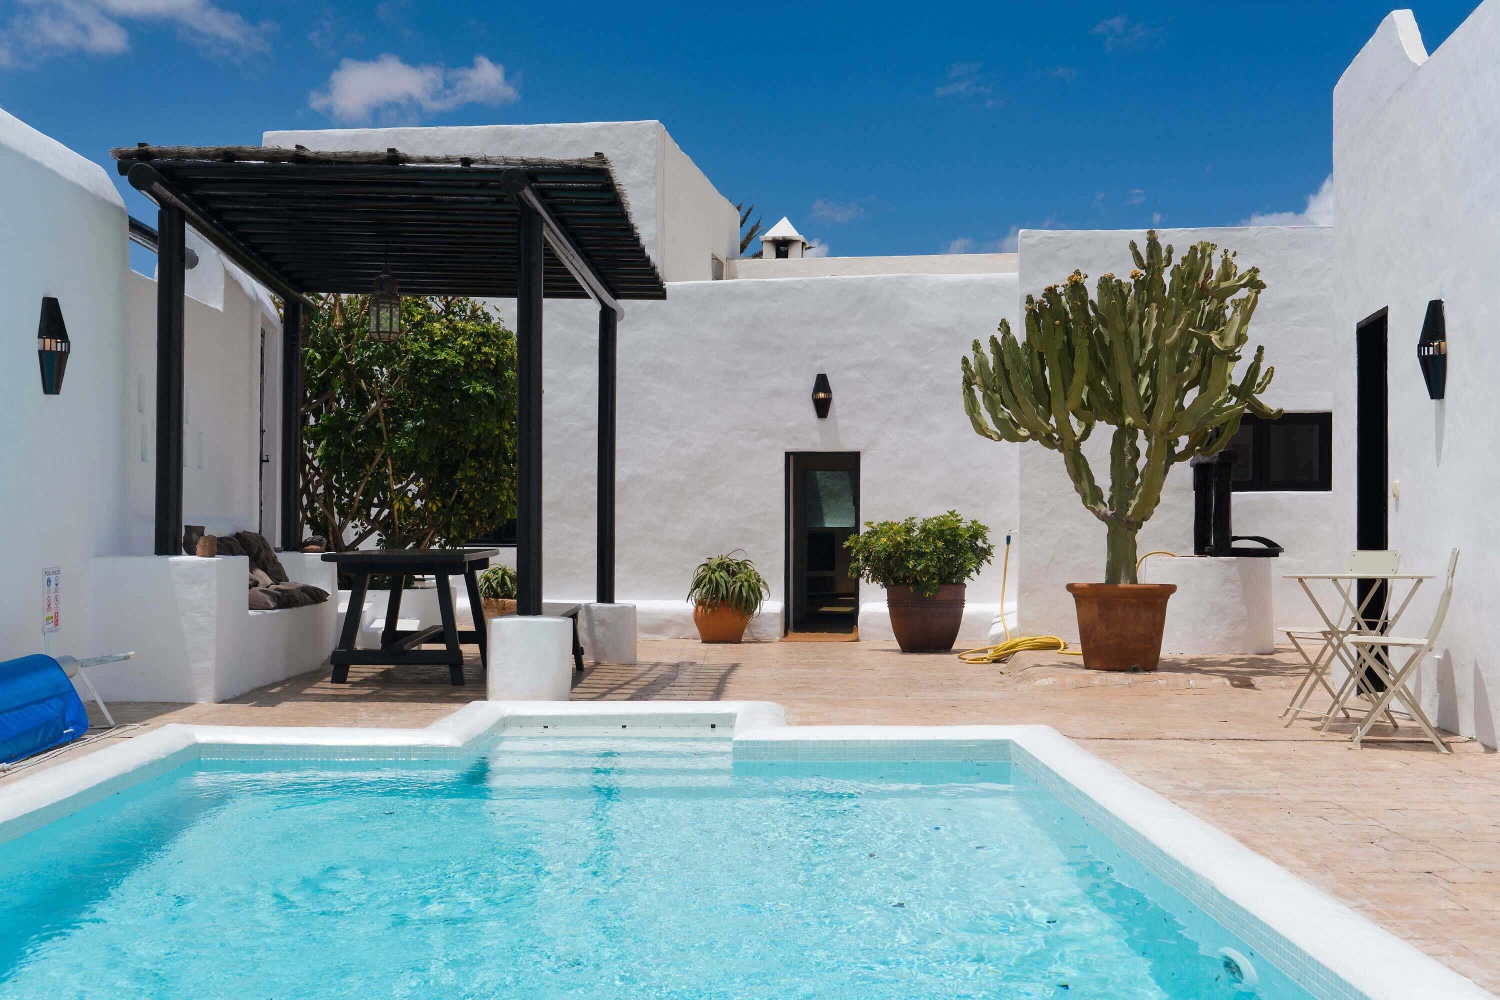 Luxury house with private heated pool and an ideal location to explore the rest of Lanzarote